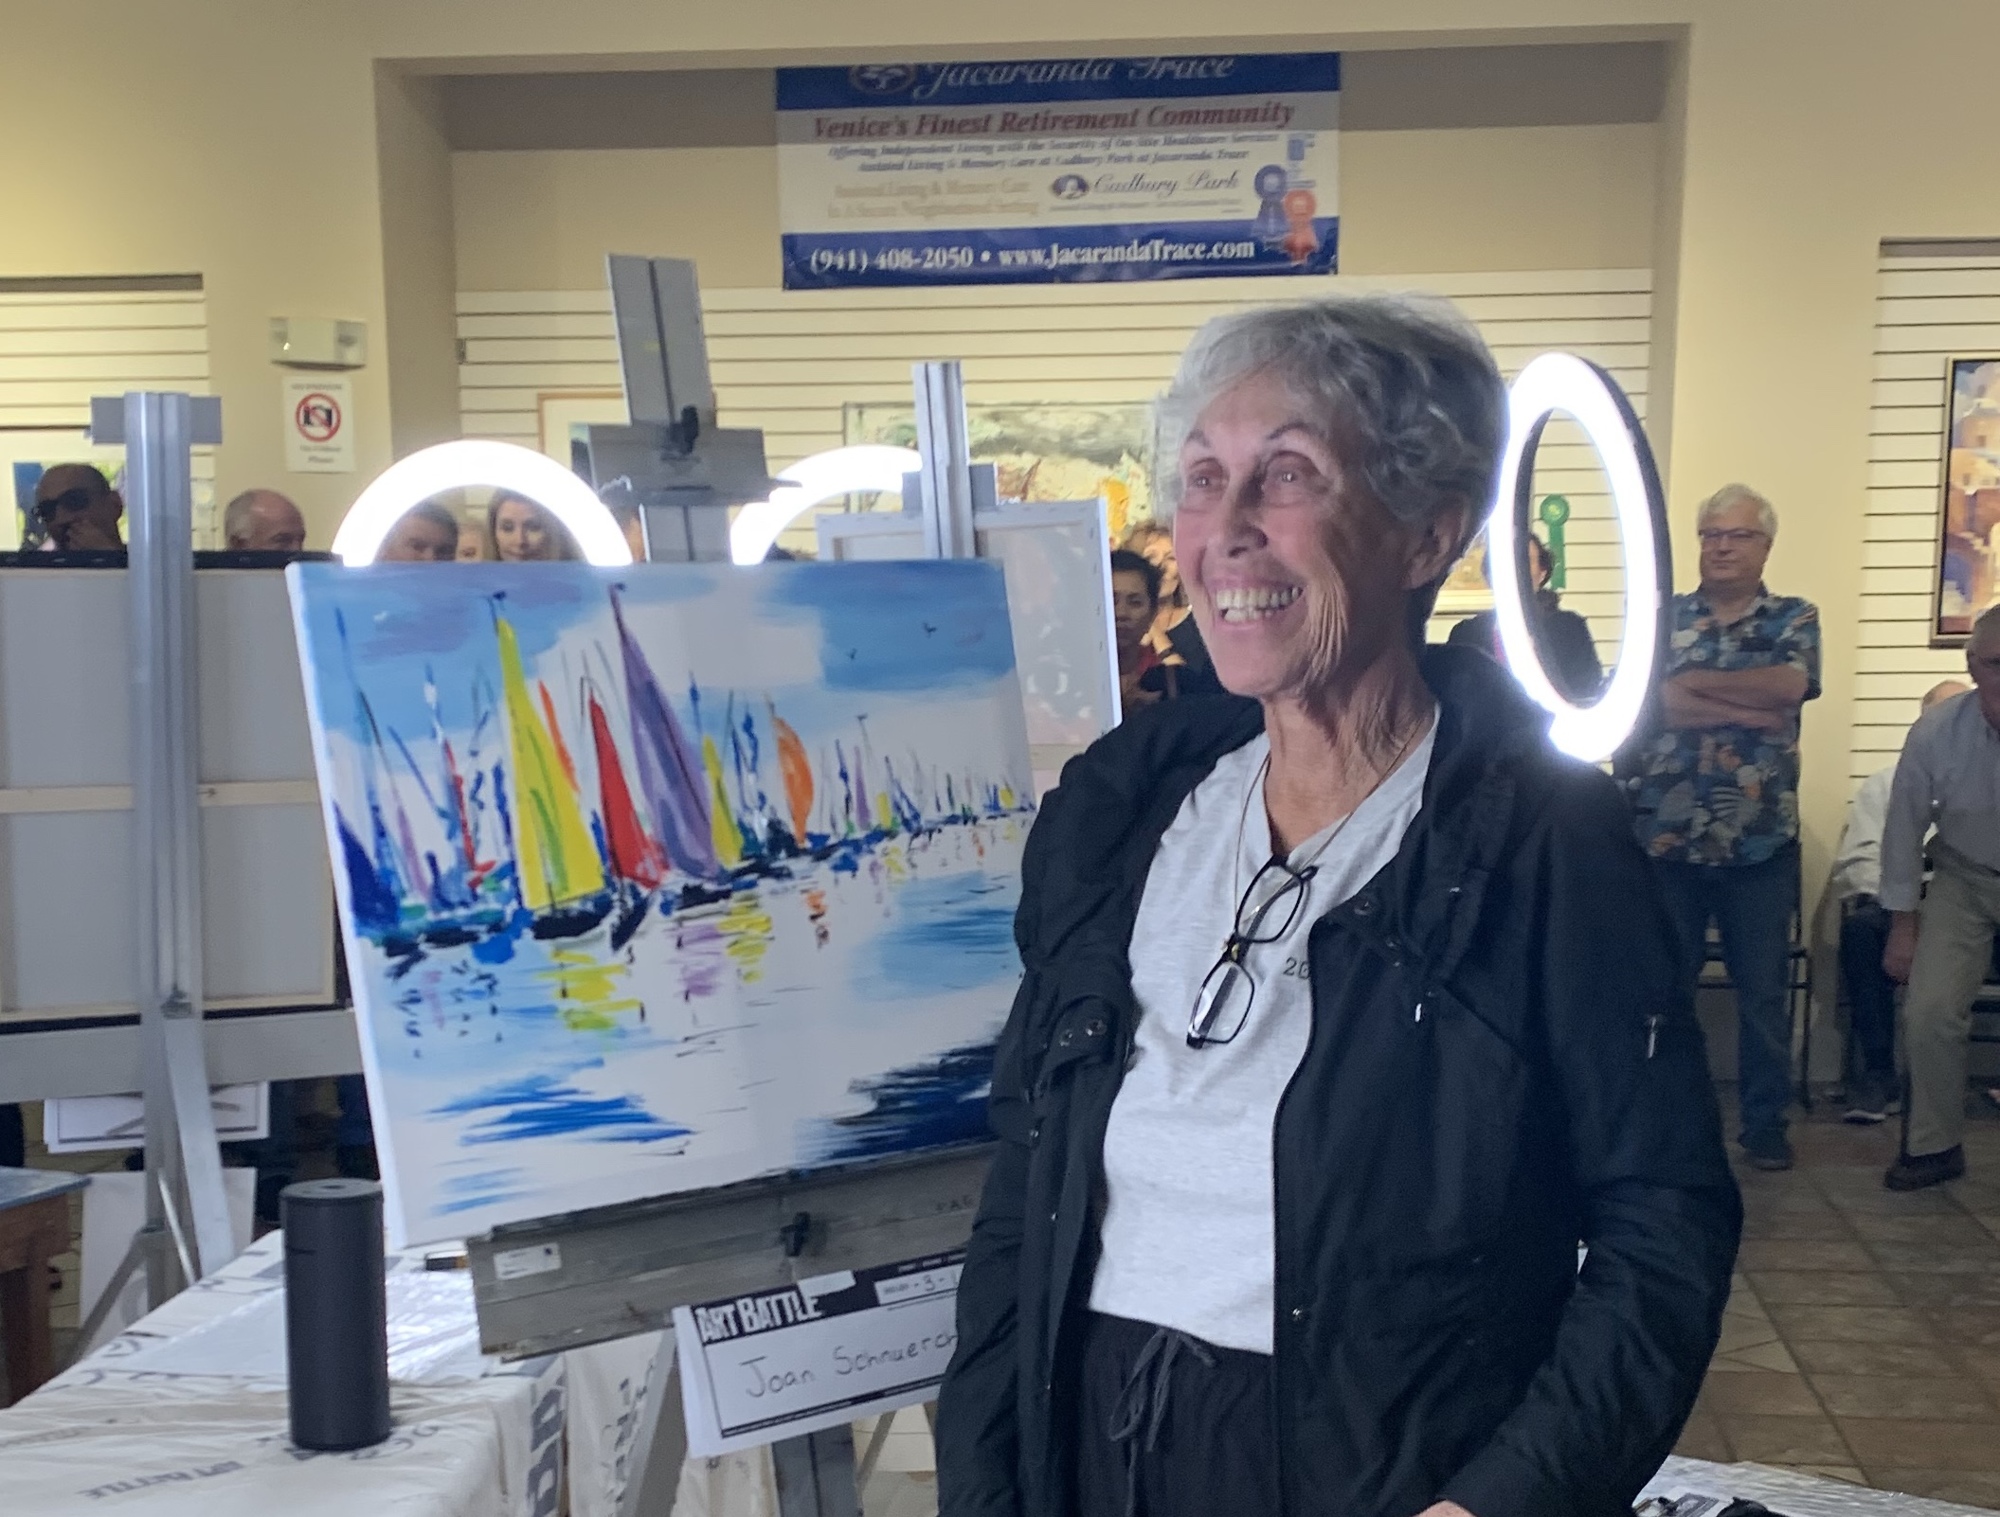 Joan Schnuerch signed up for Art Battle Venice mostly because she though it would be fun. She's taking the sam attitude into the state final.